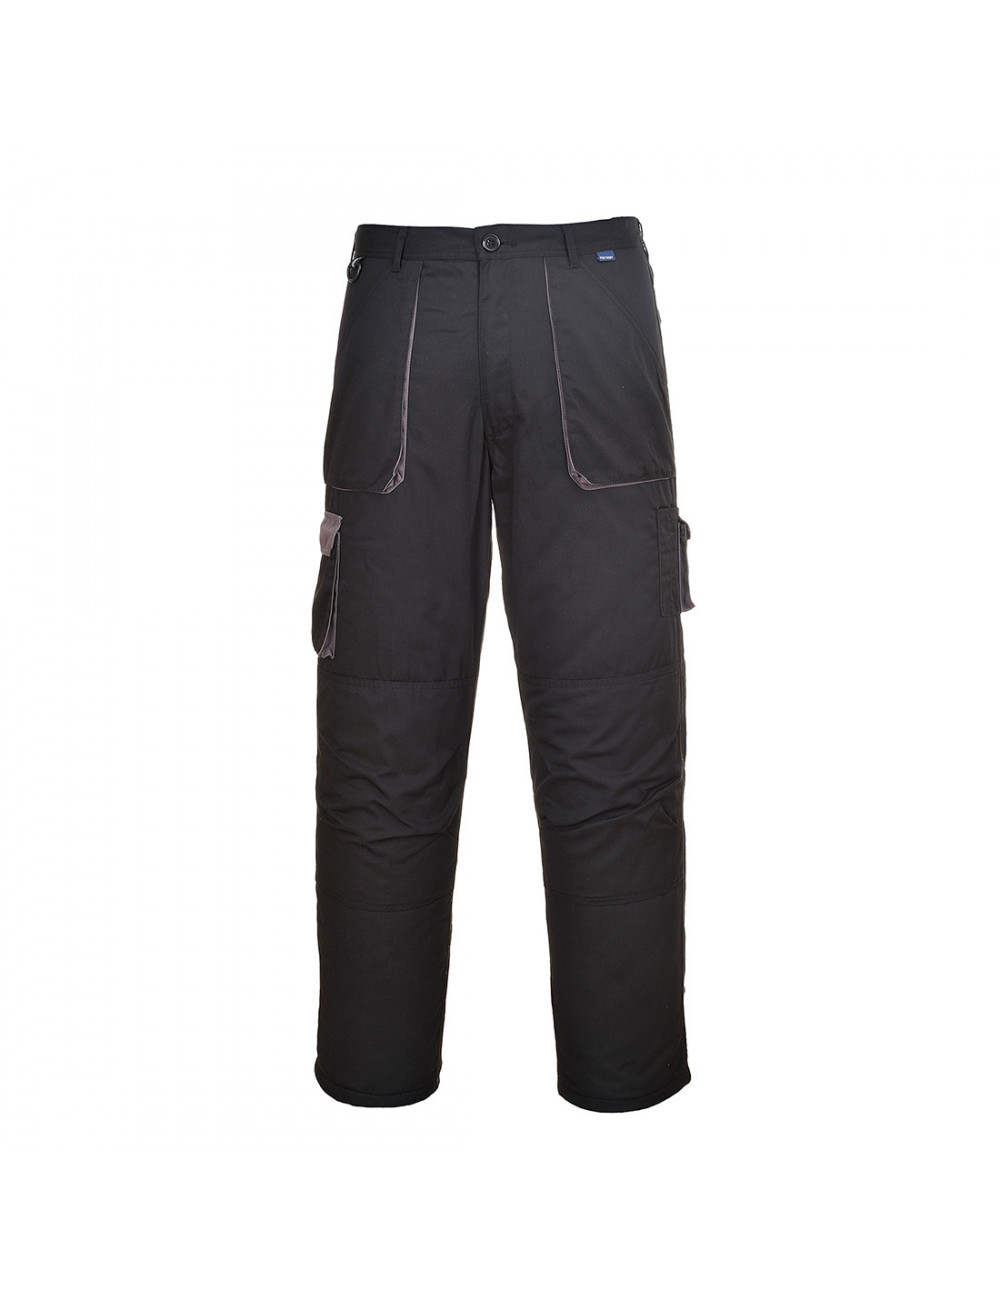 Insulated texo trousers. black Portwest Portwest